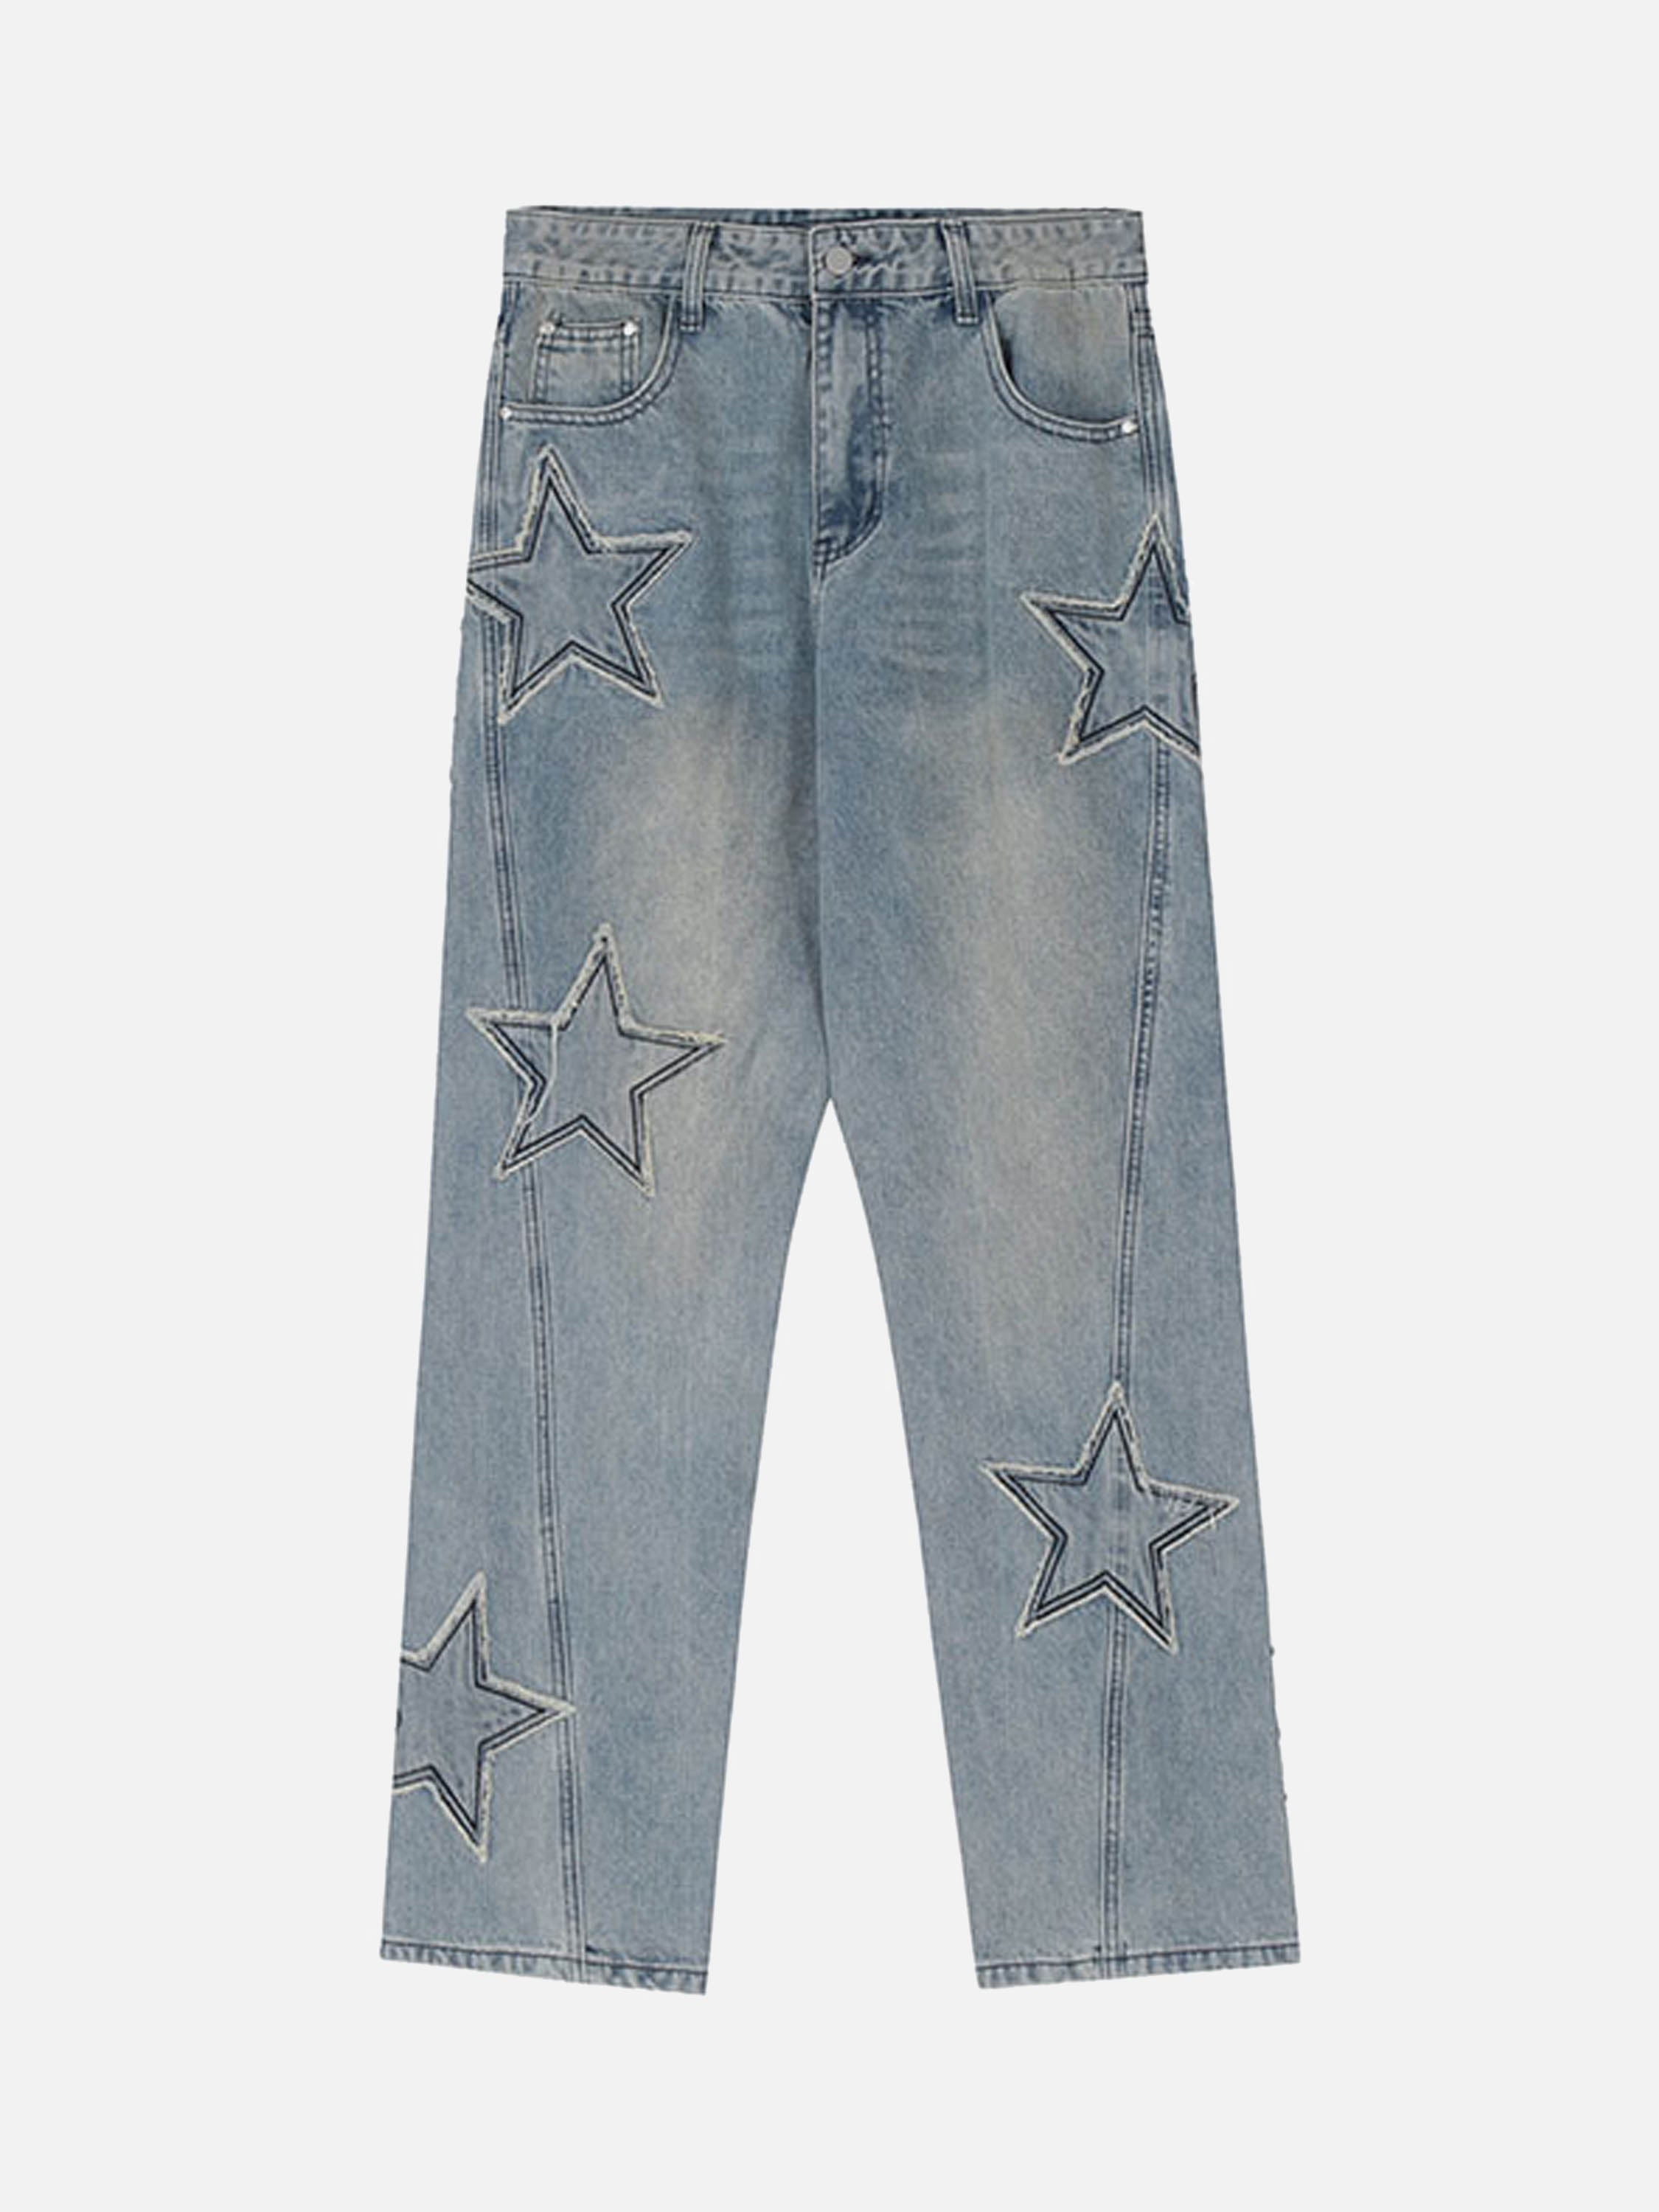 Thesupermade American Vintage Star Patch Embroidered Jeans